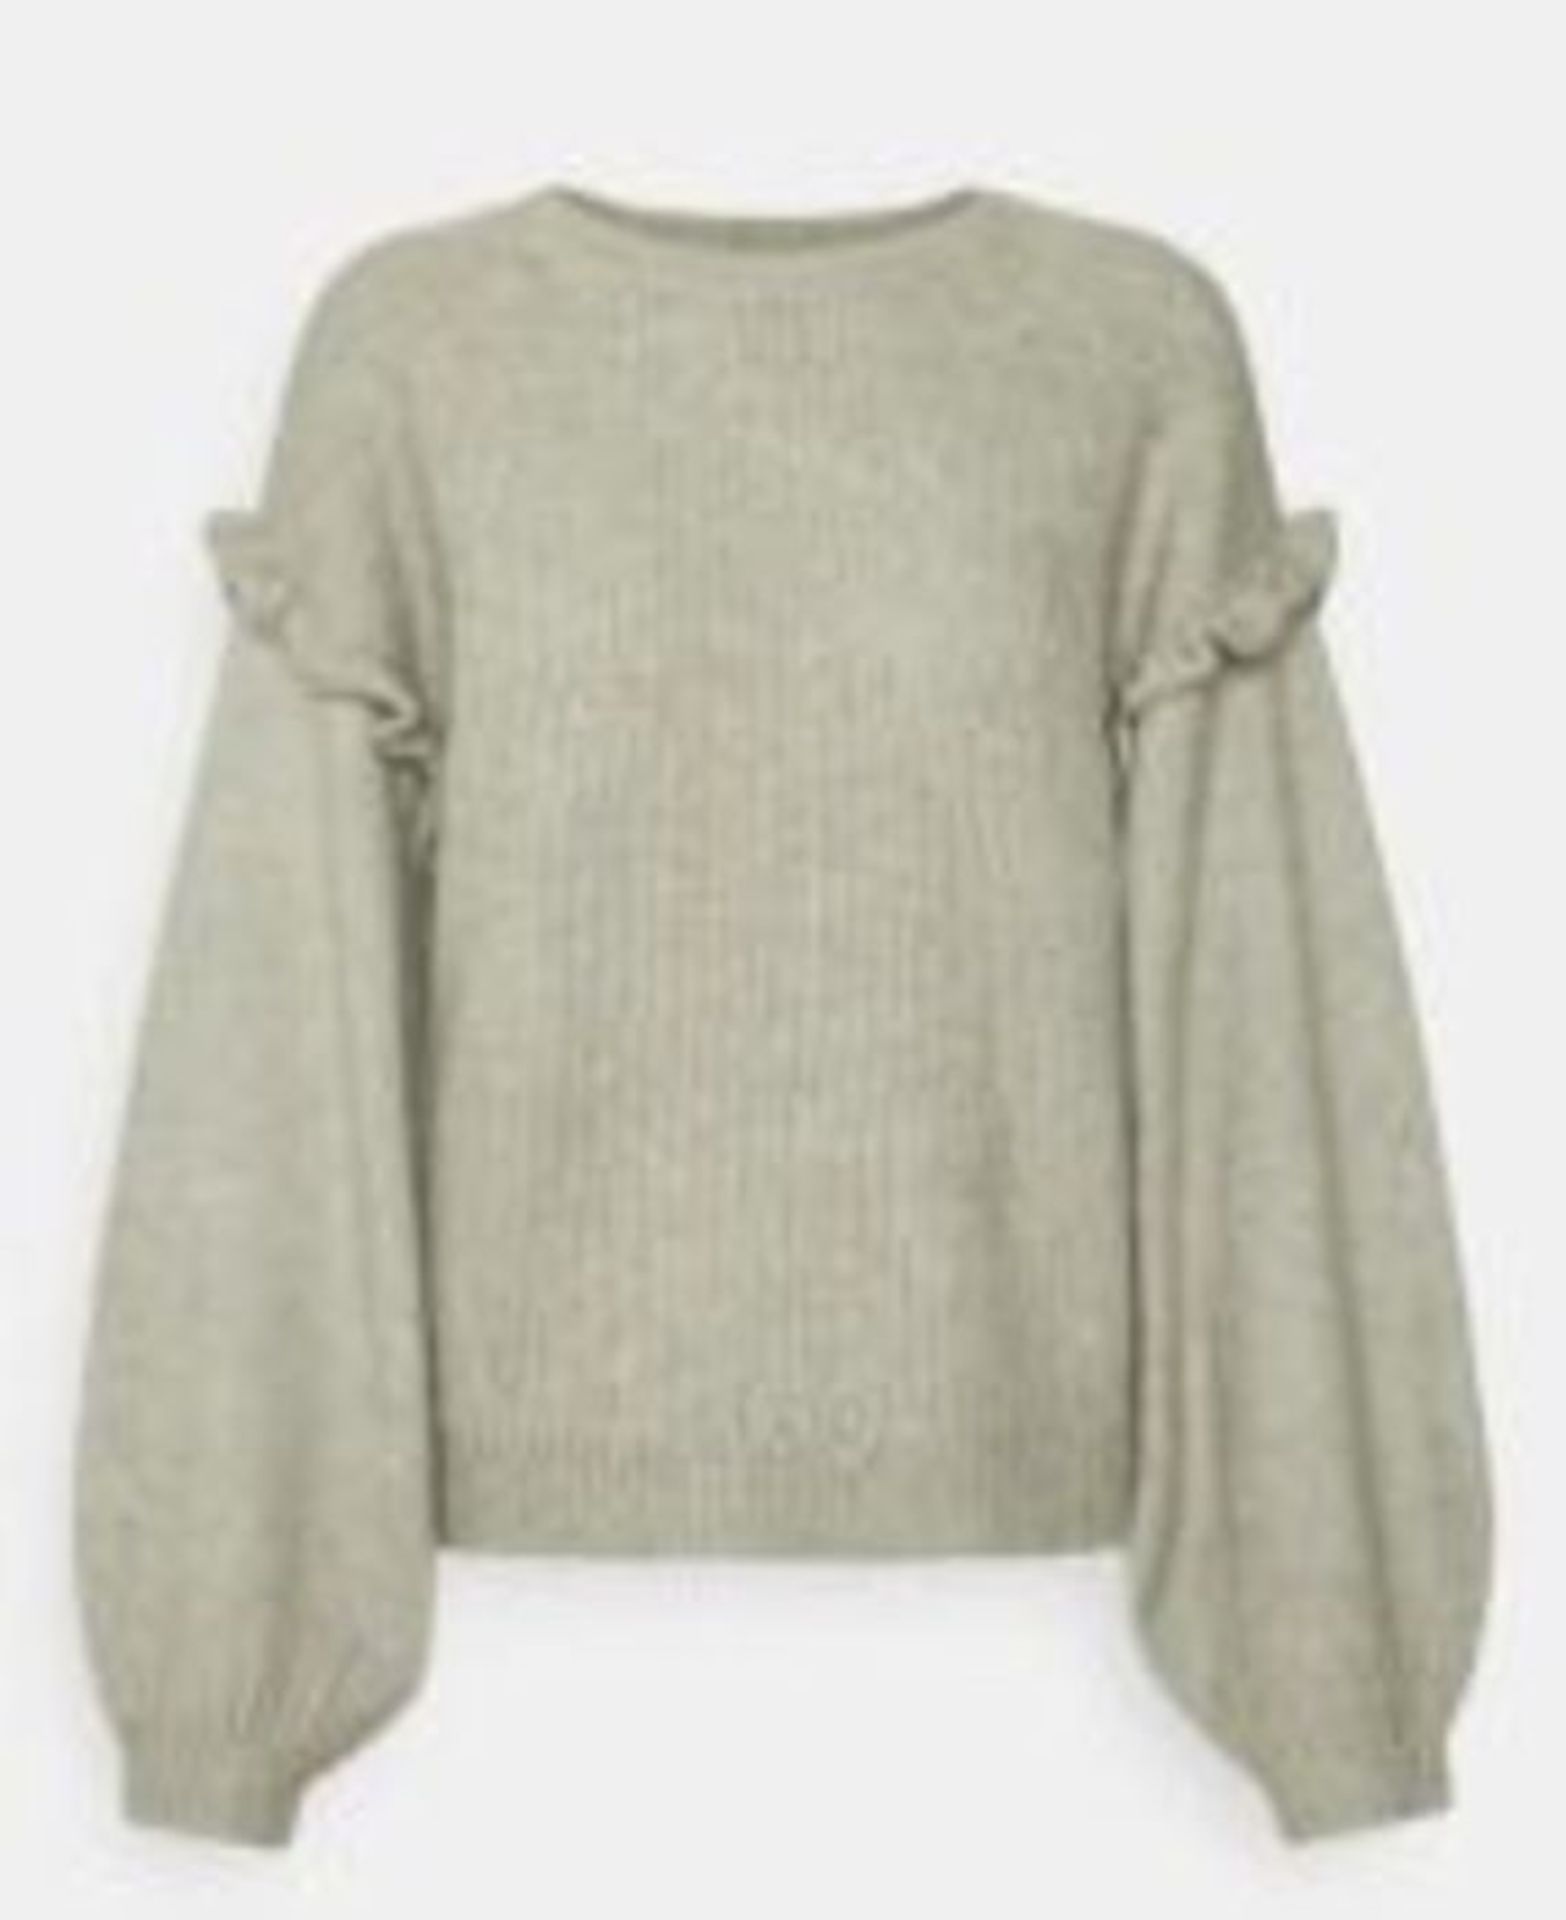 JDY - HUDSON LIFE BIG SLEEVE JUMPER - ABBEY STONE GREY - SIZE: MEDIUM. RRP £25.00 AS NEW WITH TAGS